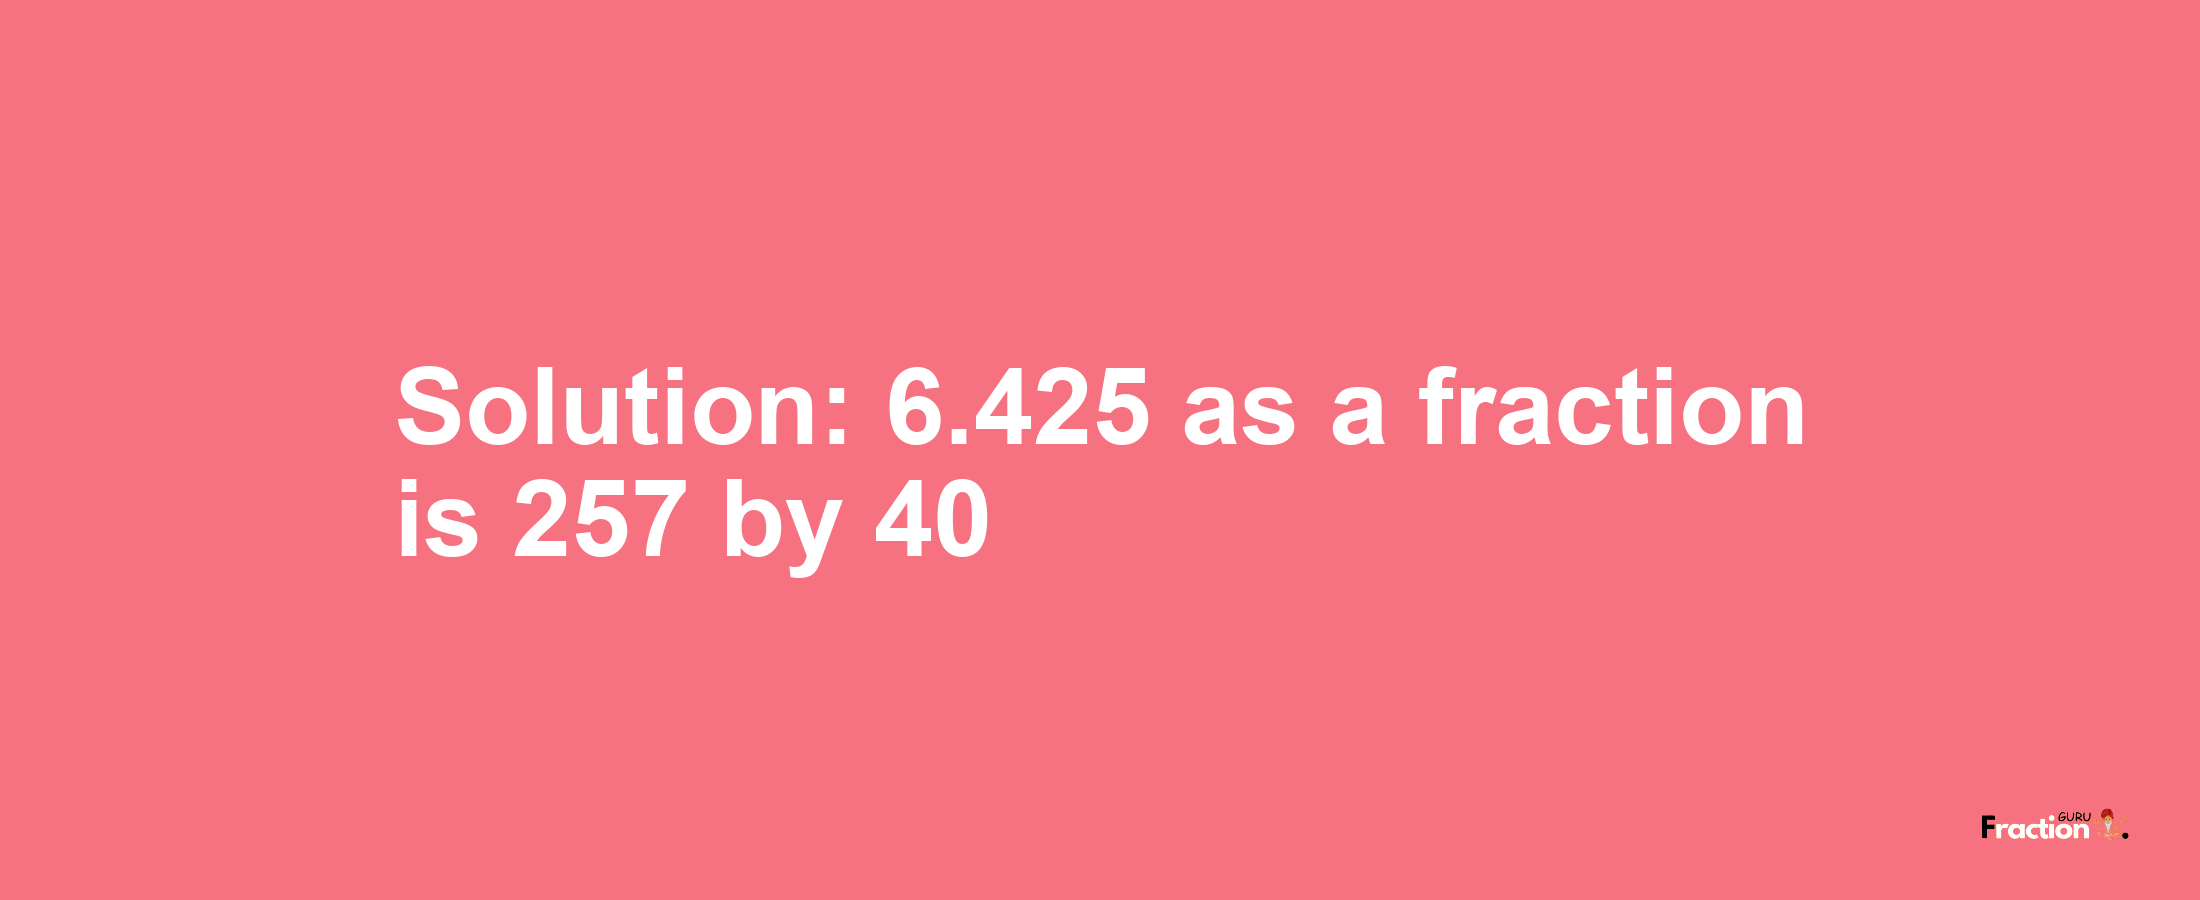 Solution:6.425 as a fraction is 257/40